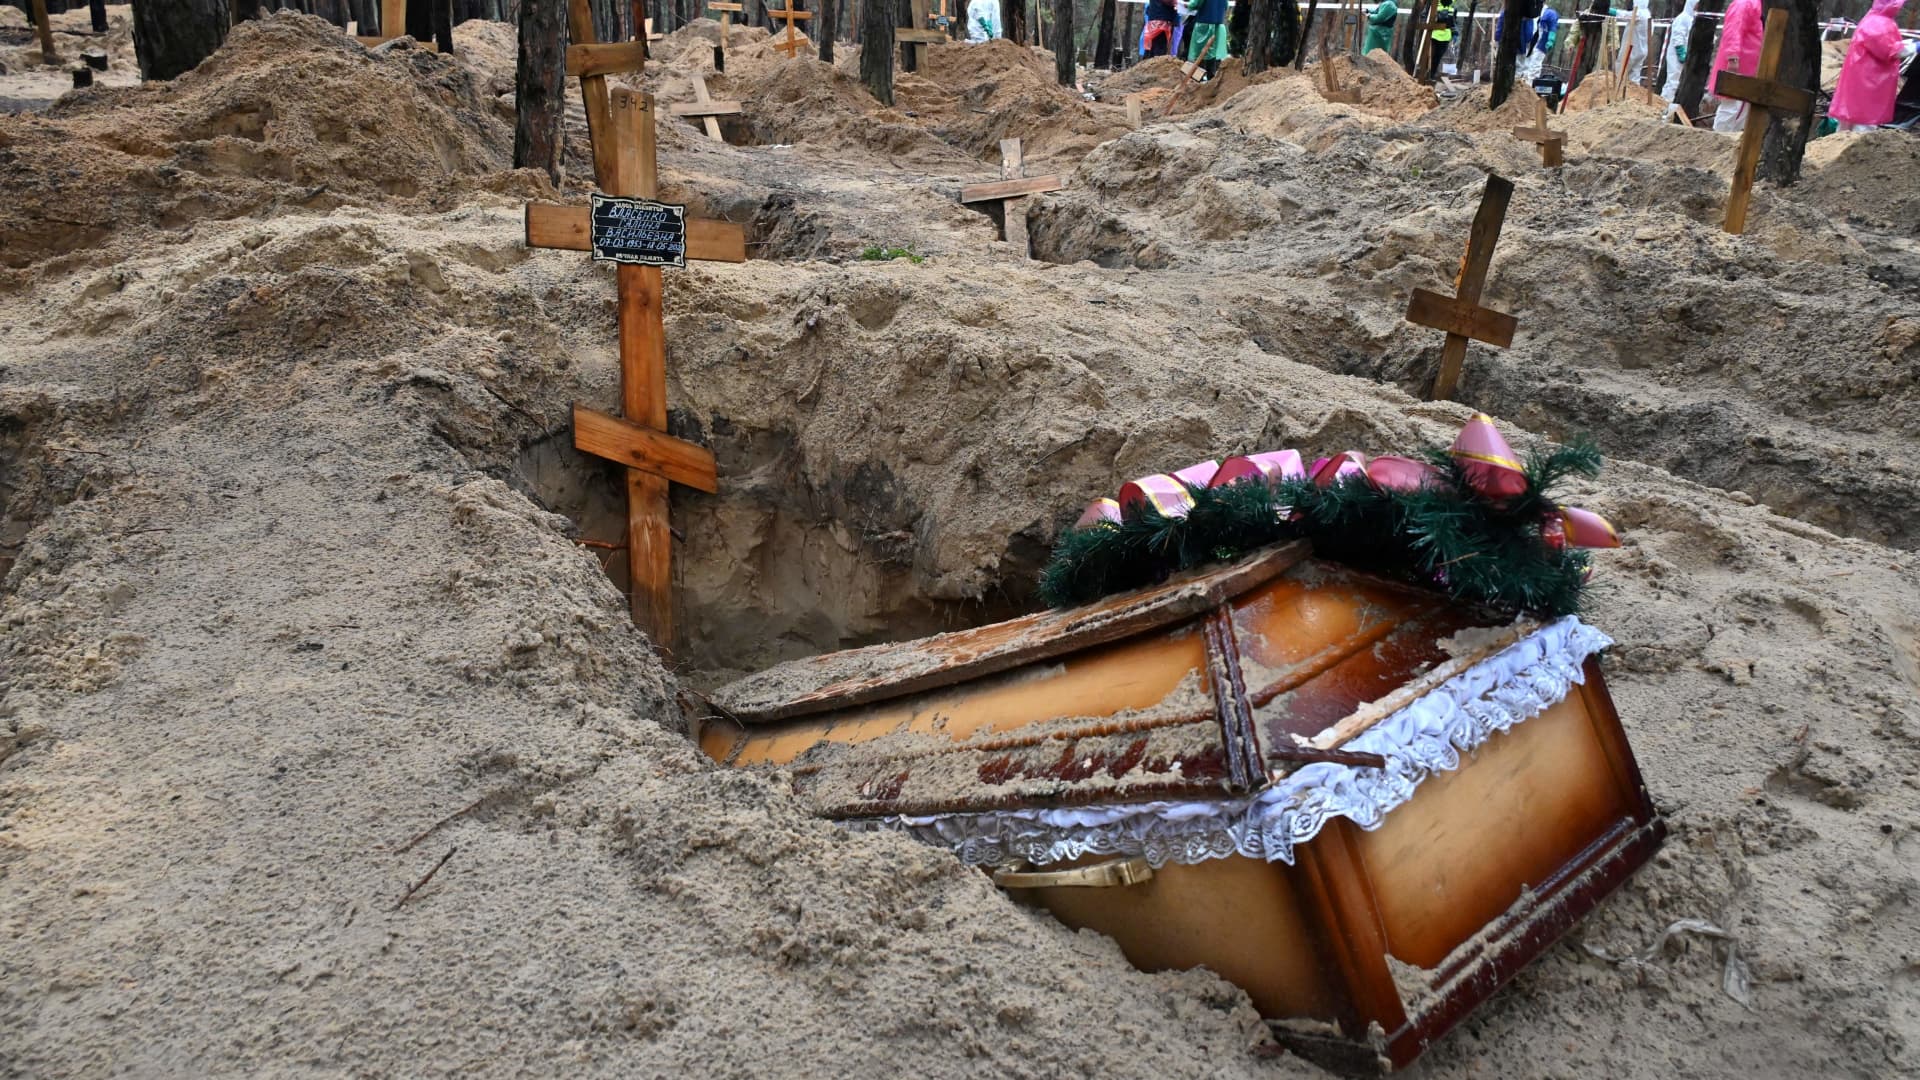 A coffin sticks out of a grave in a forest near Izium, eastern Ukraine, on Sept. 23, 2022, where Ukrainian investigators uncovered more than 440 graves after the city was recaptured from Russian forces, bringing fresh claims of war atrocities.